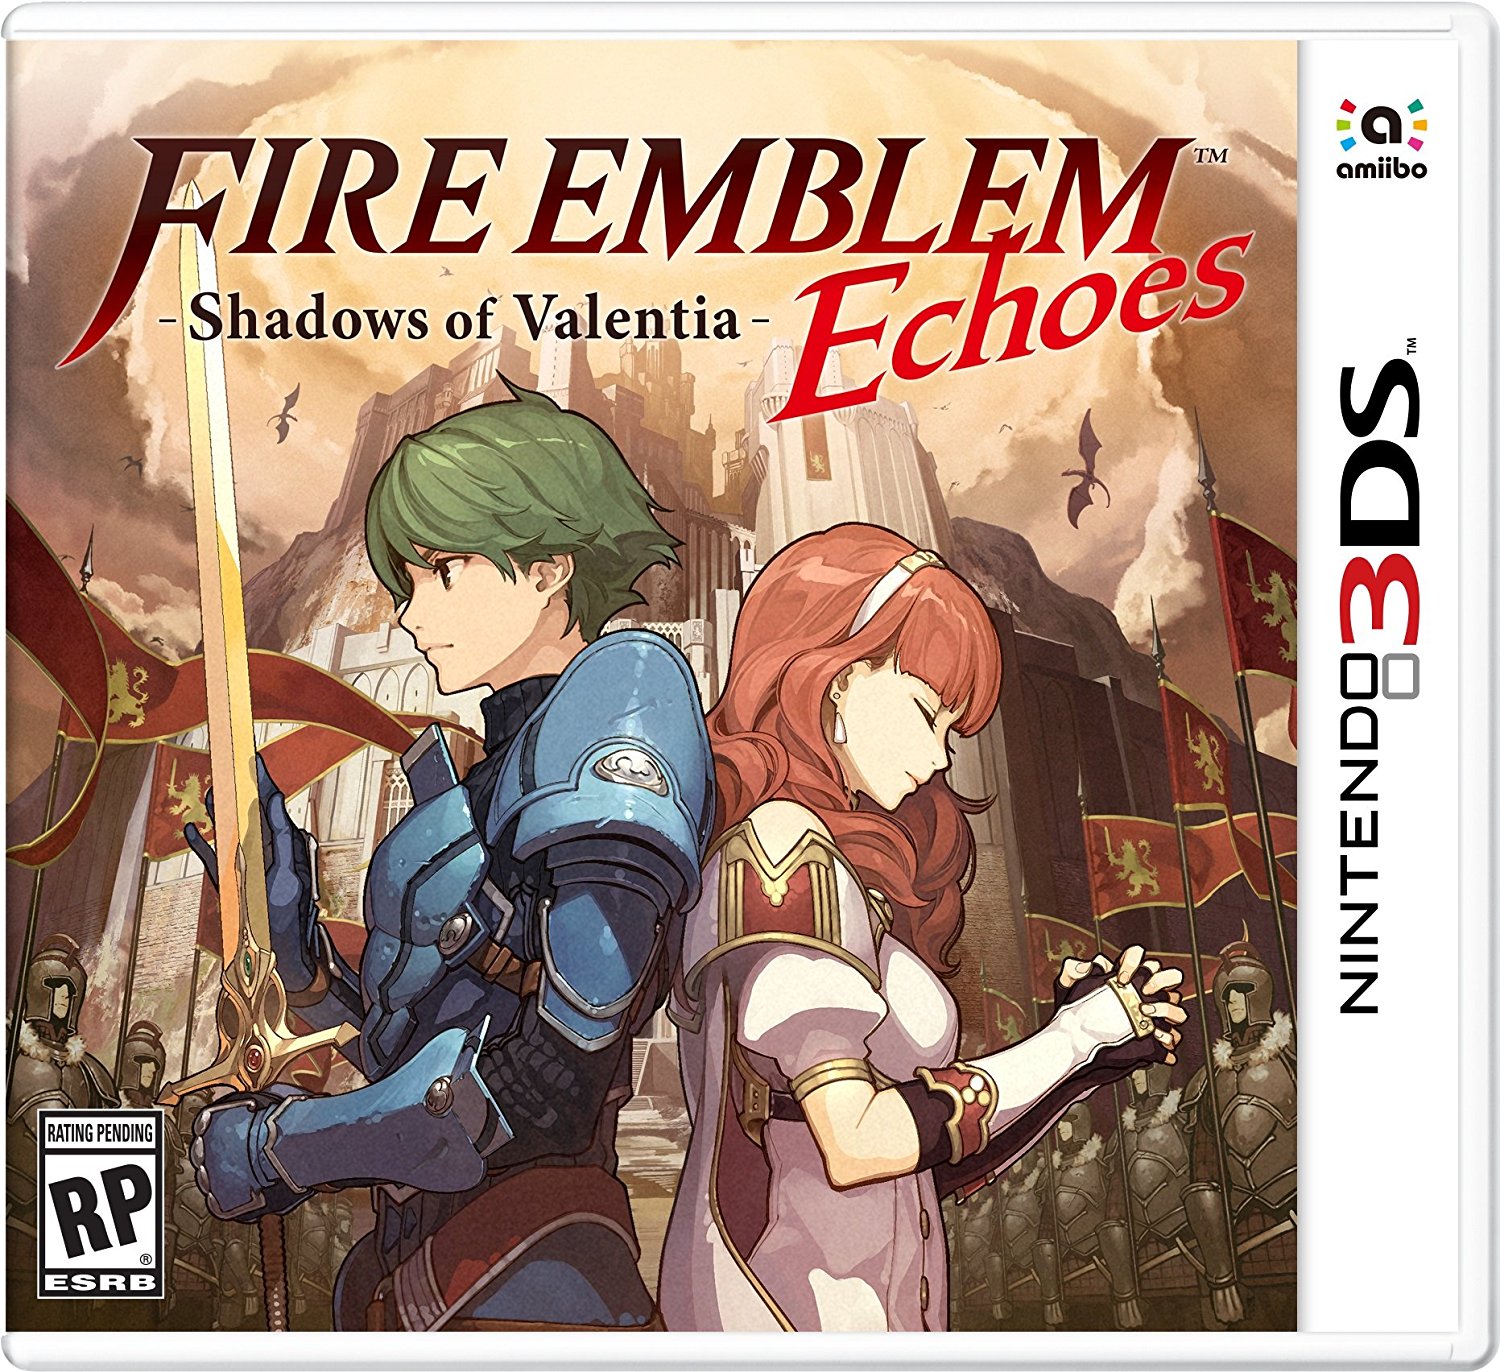 Fire Emblem Echoes: Shadows of Valentia remake launching on 3DS in May